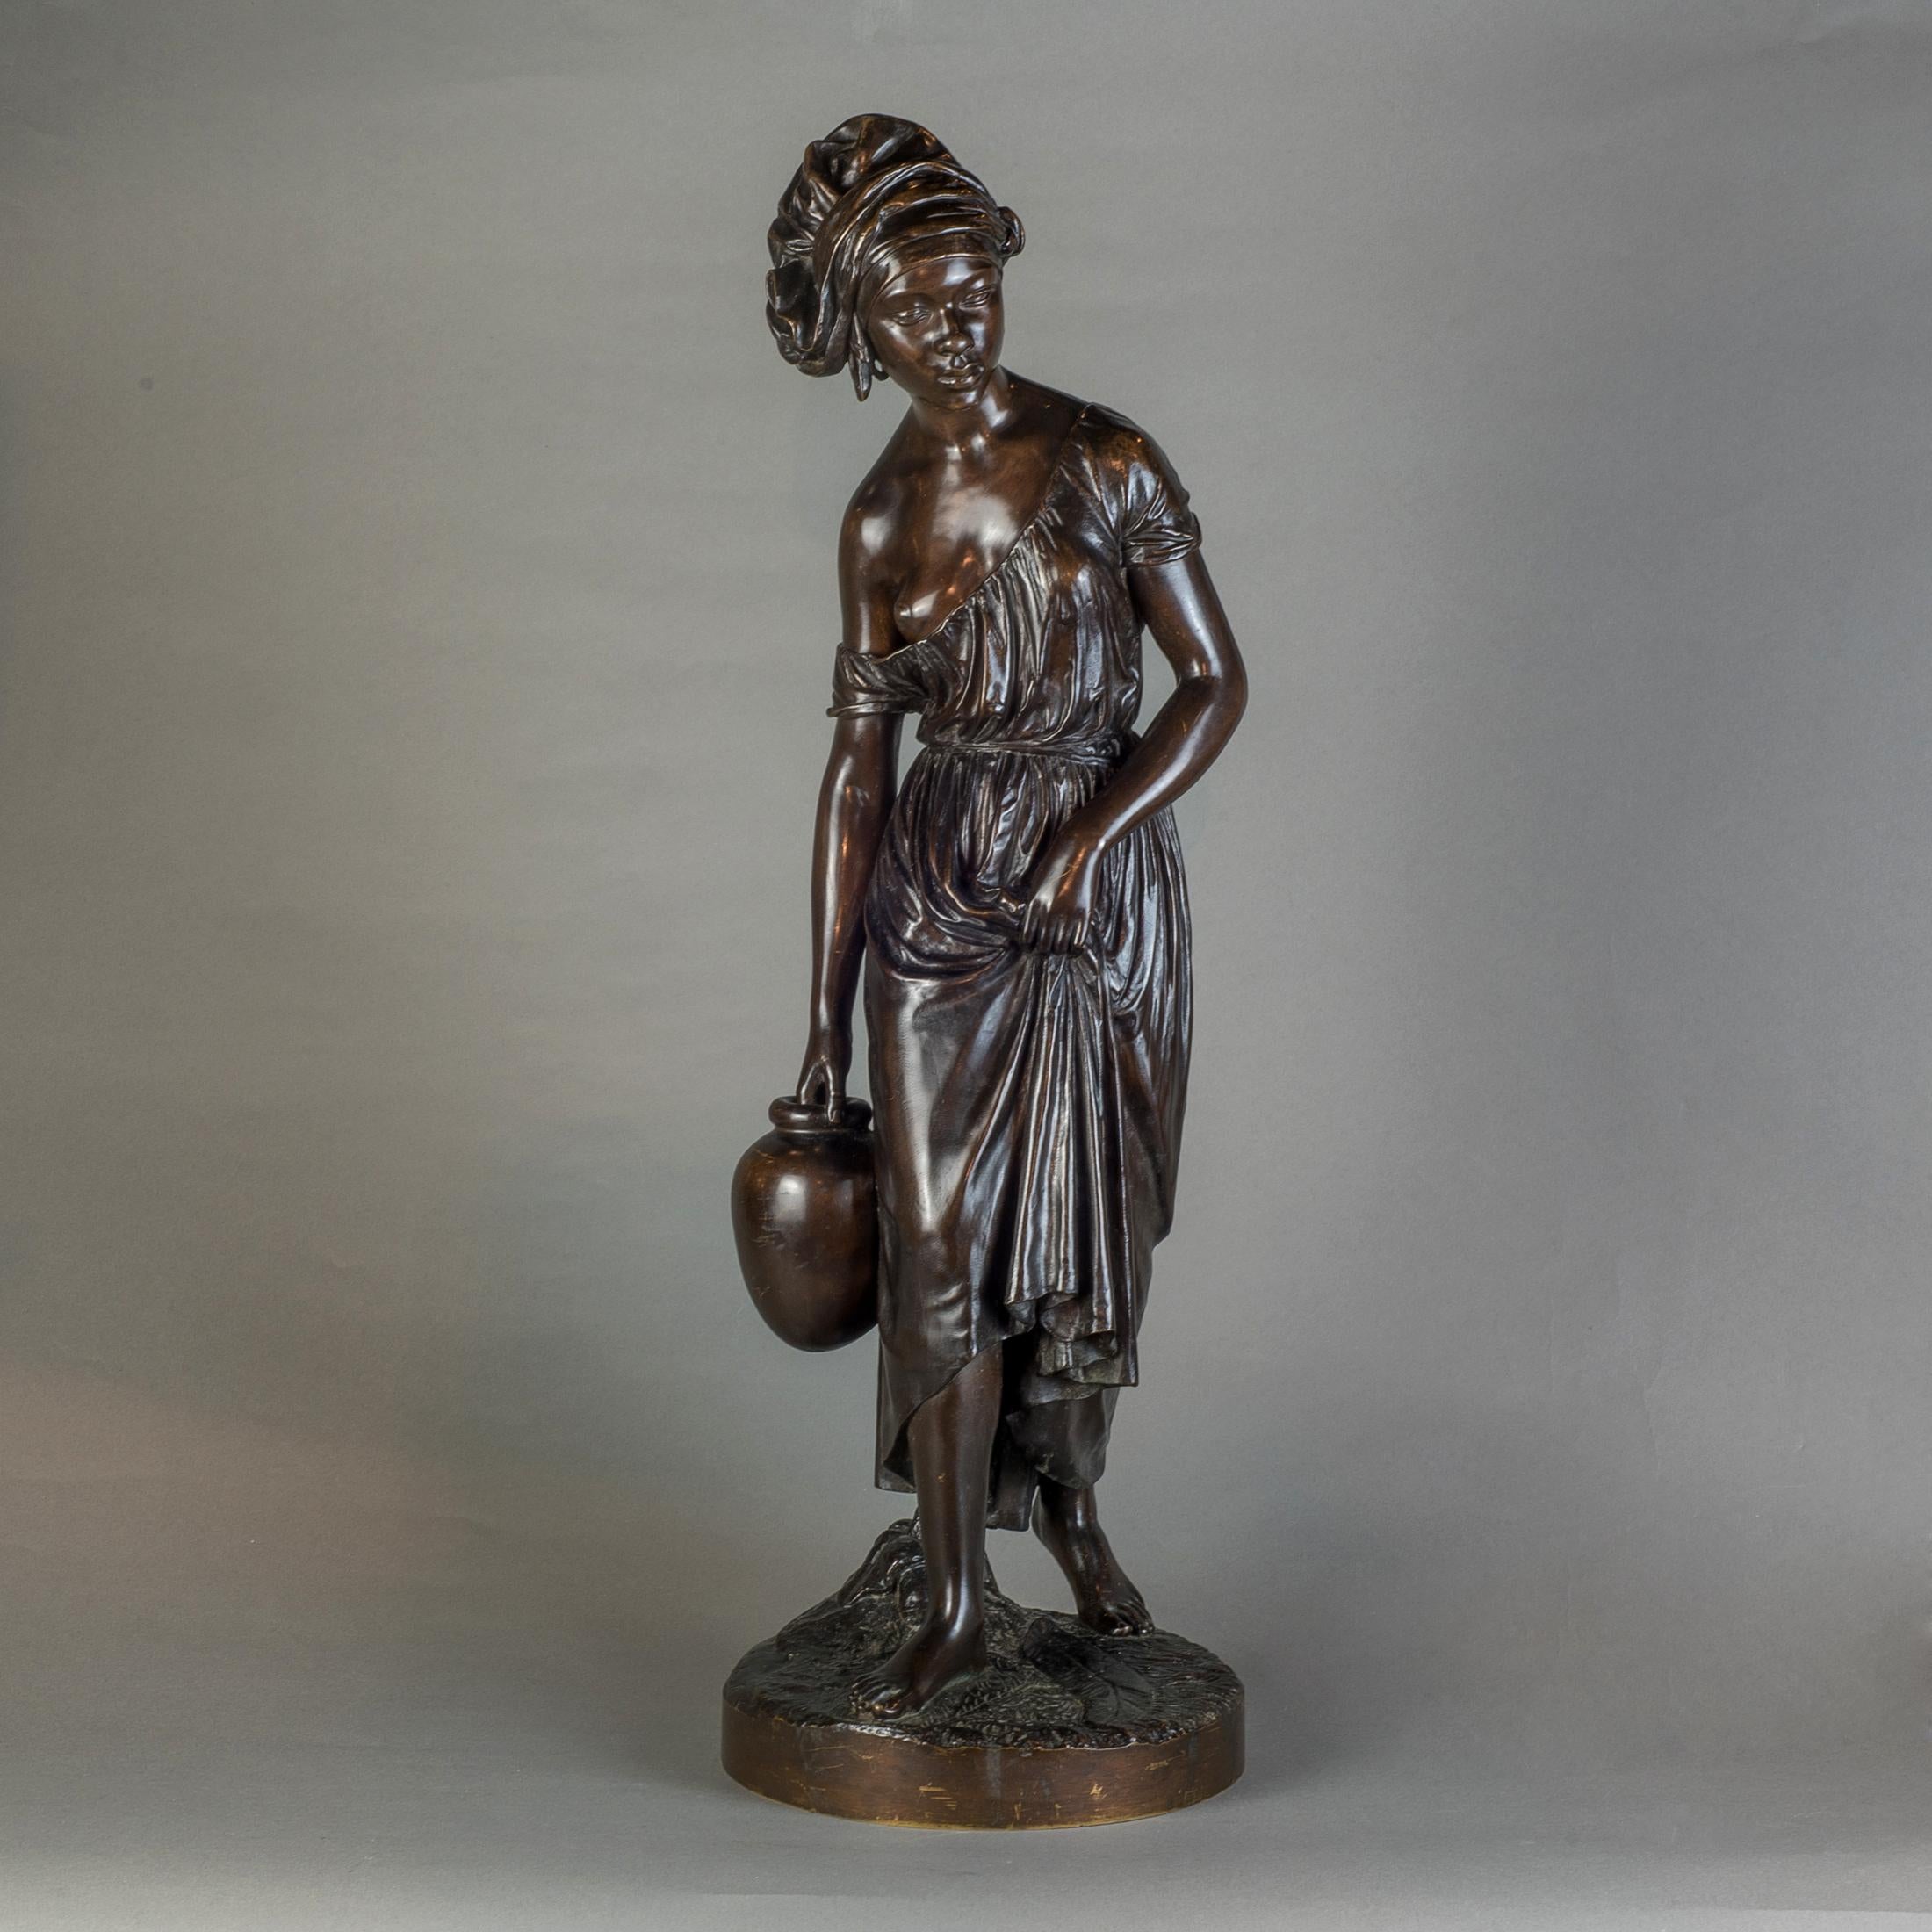 The French bronze sculpture depicts a Nubian woman in a head scarf, carrying water. The sculpture shows her in movement, holding her dress, about to place her right foot in front. Signed by artist on the base 

Artist: Charles Cumberworth